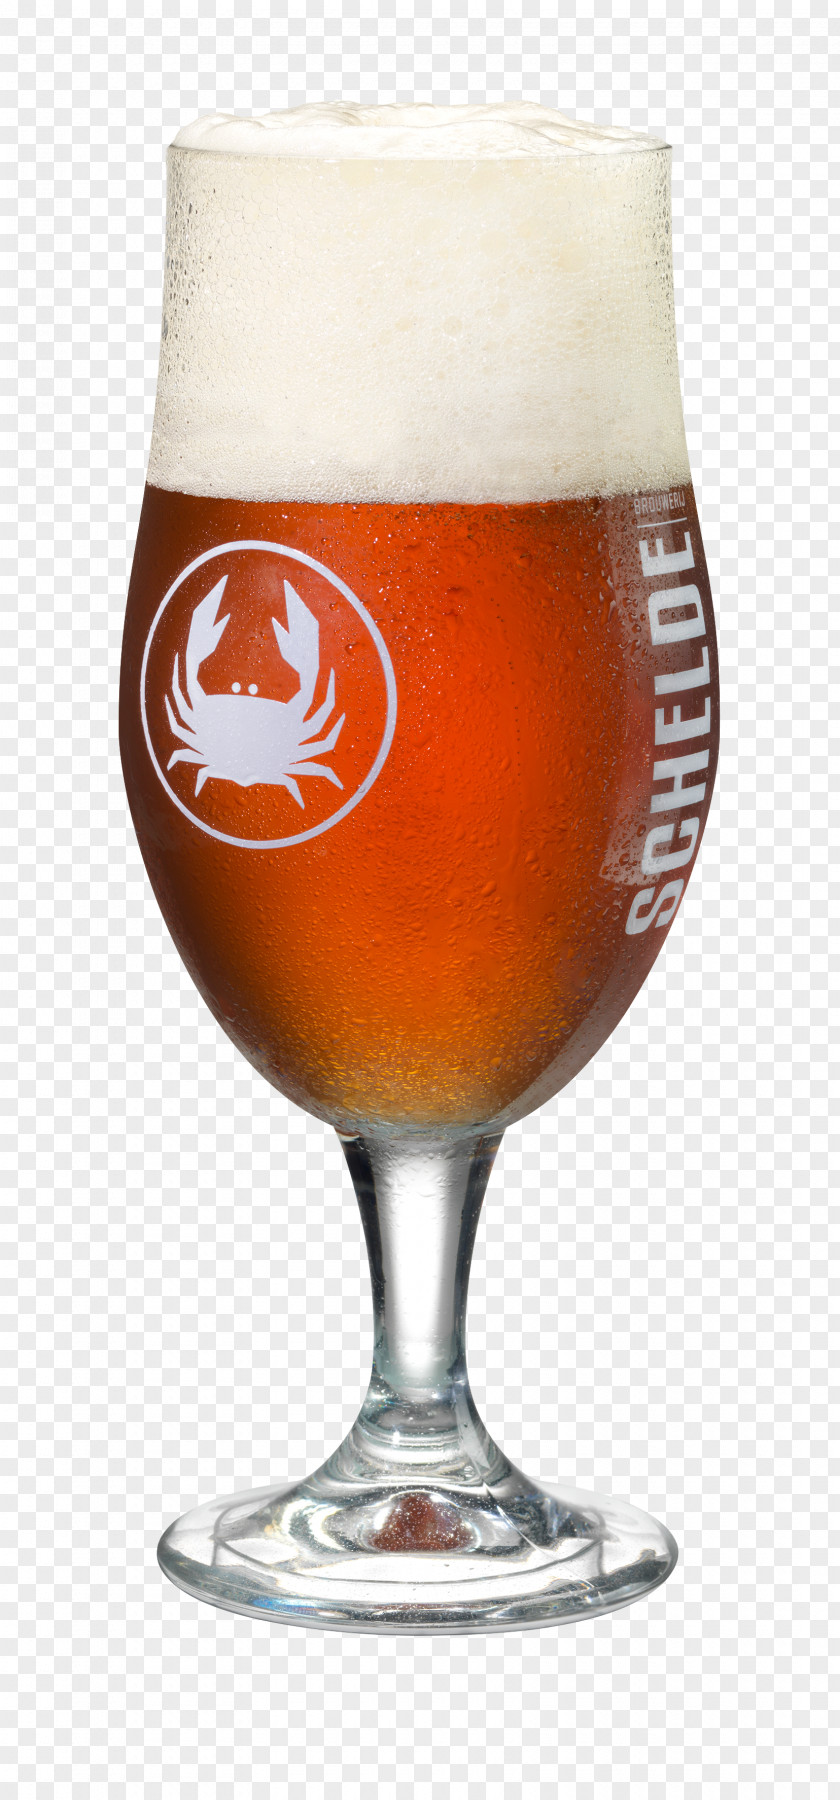 Amber Beer Glasses Scotch Ale Lager PNG